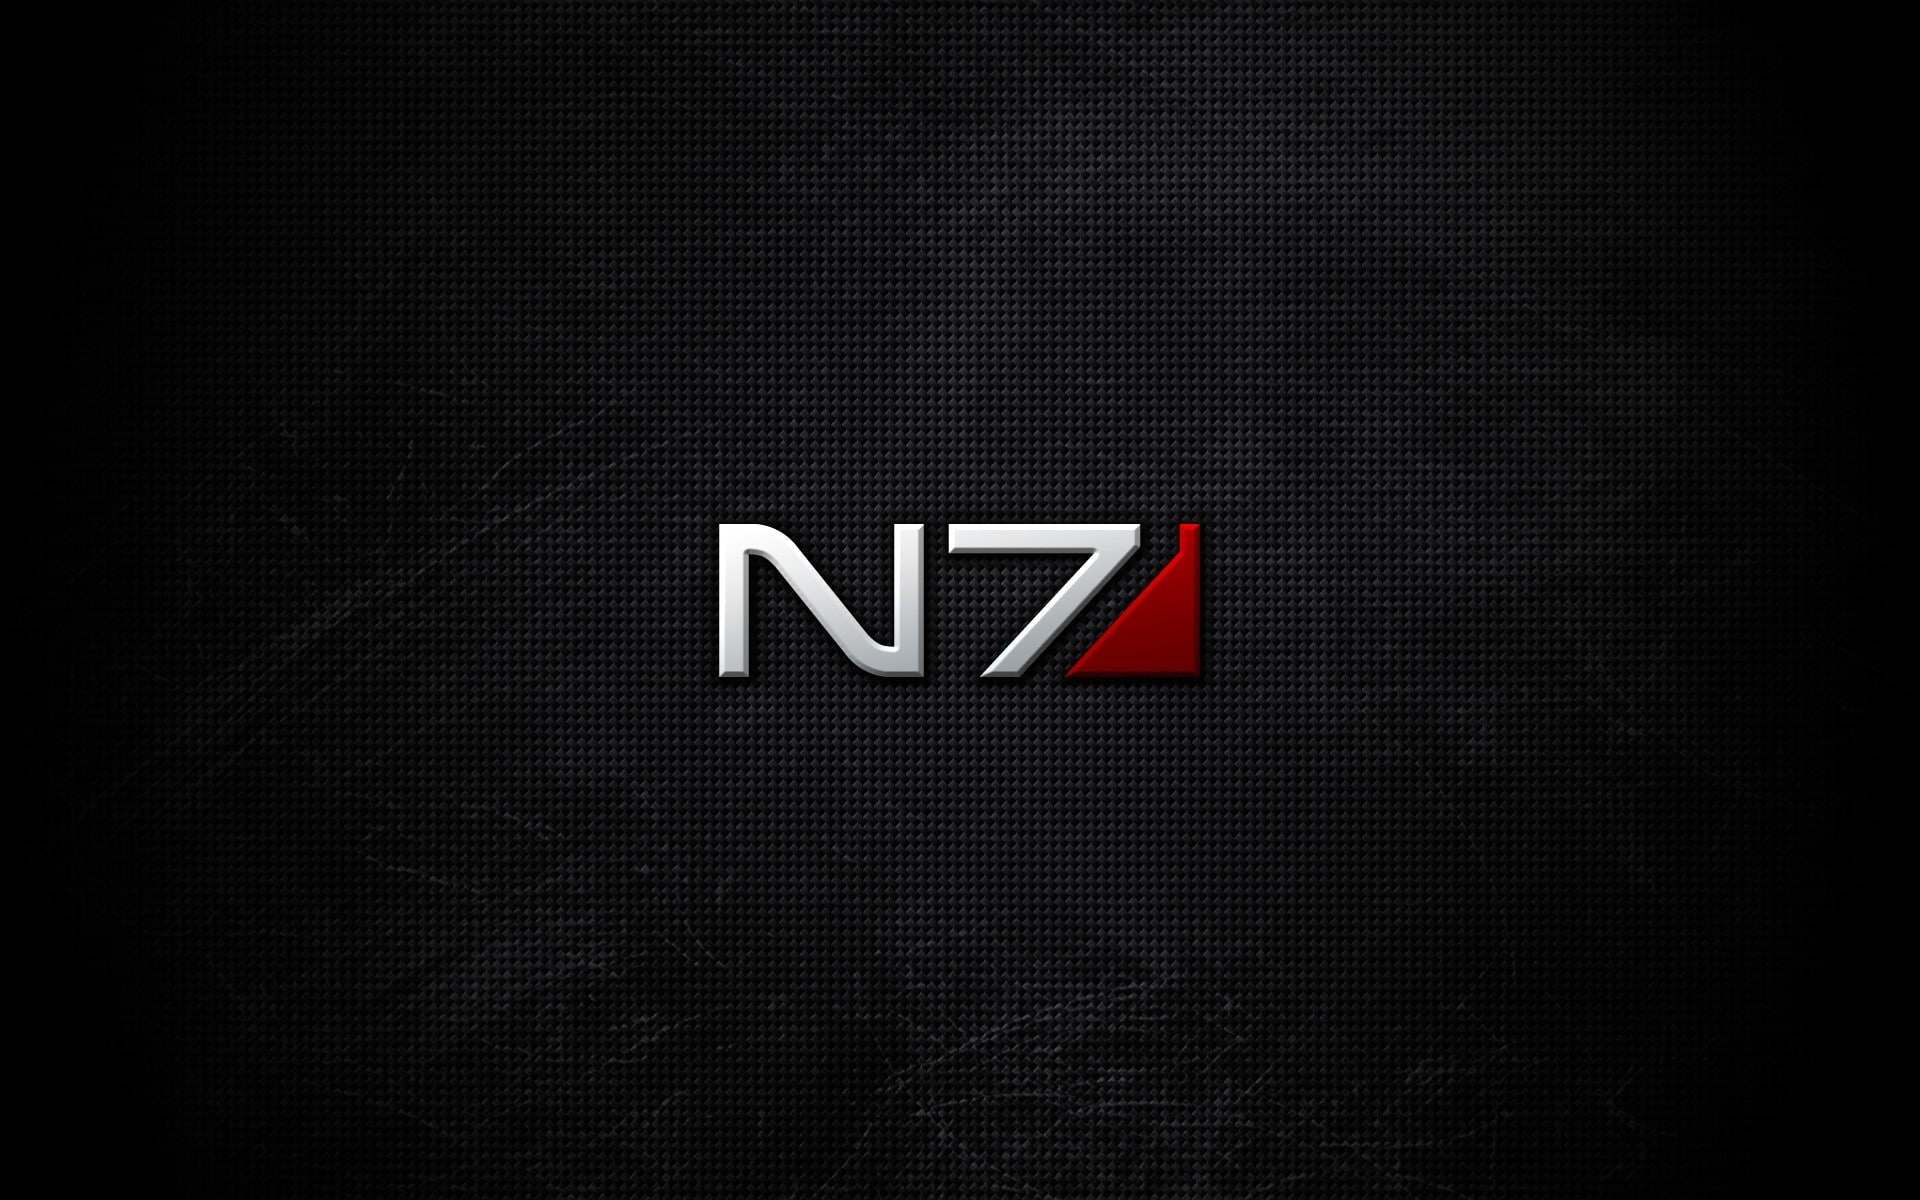 mass effect, n7, font, background, shadow